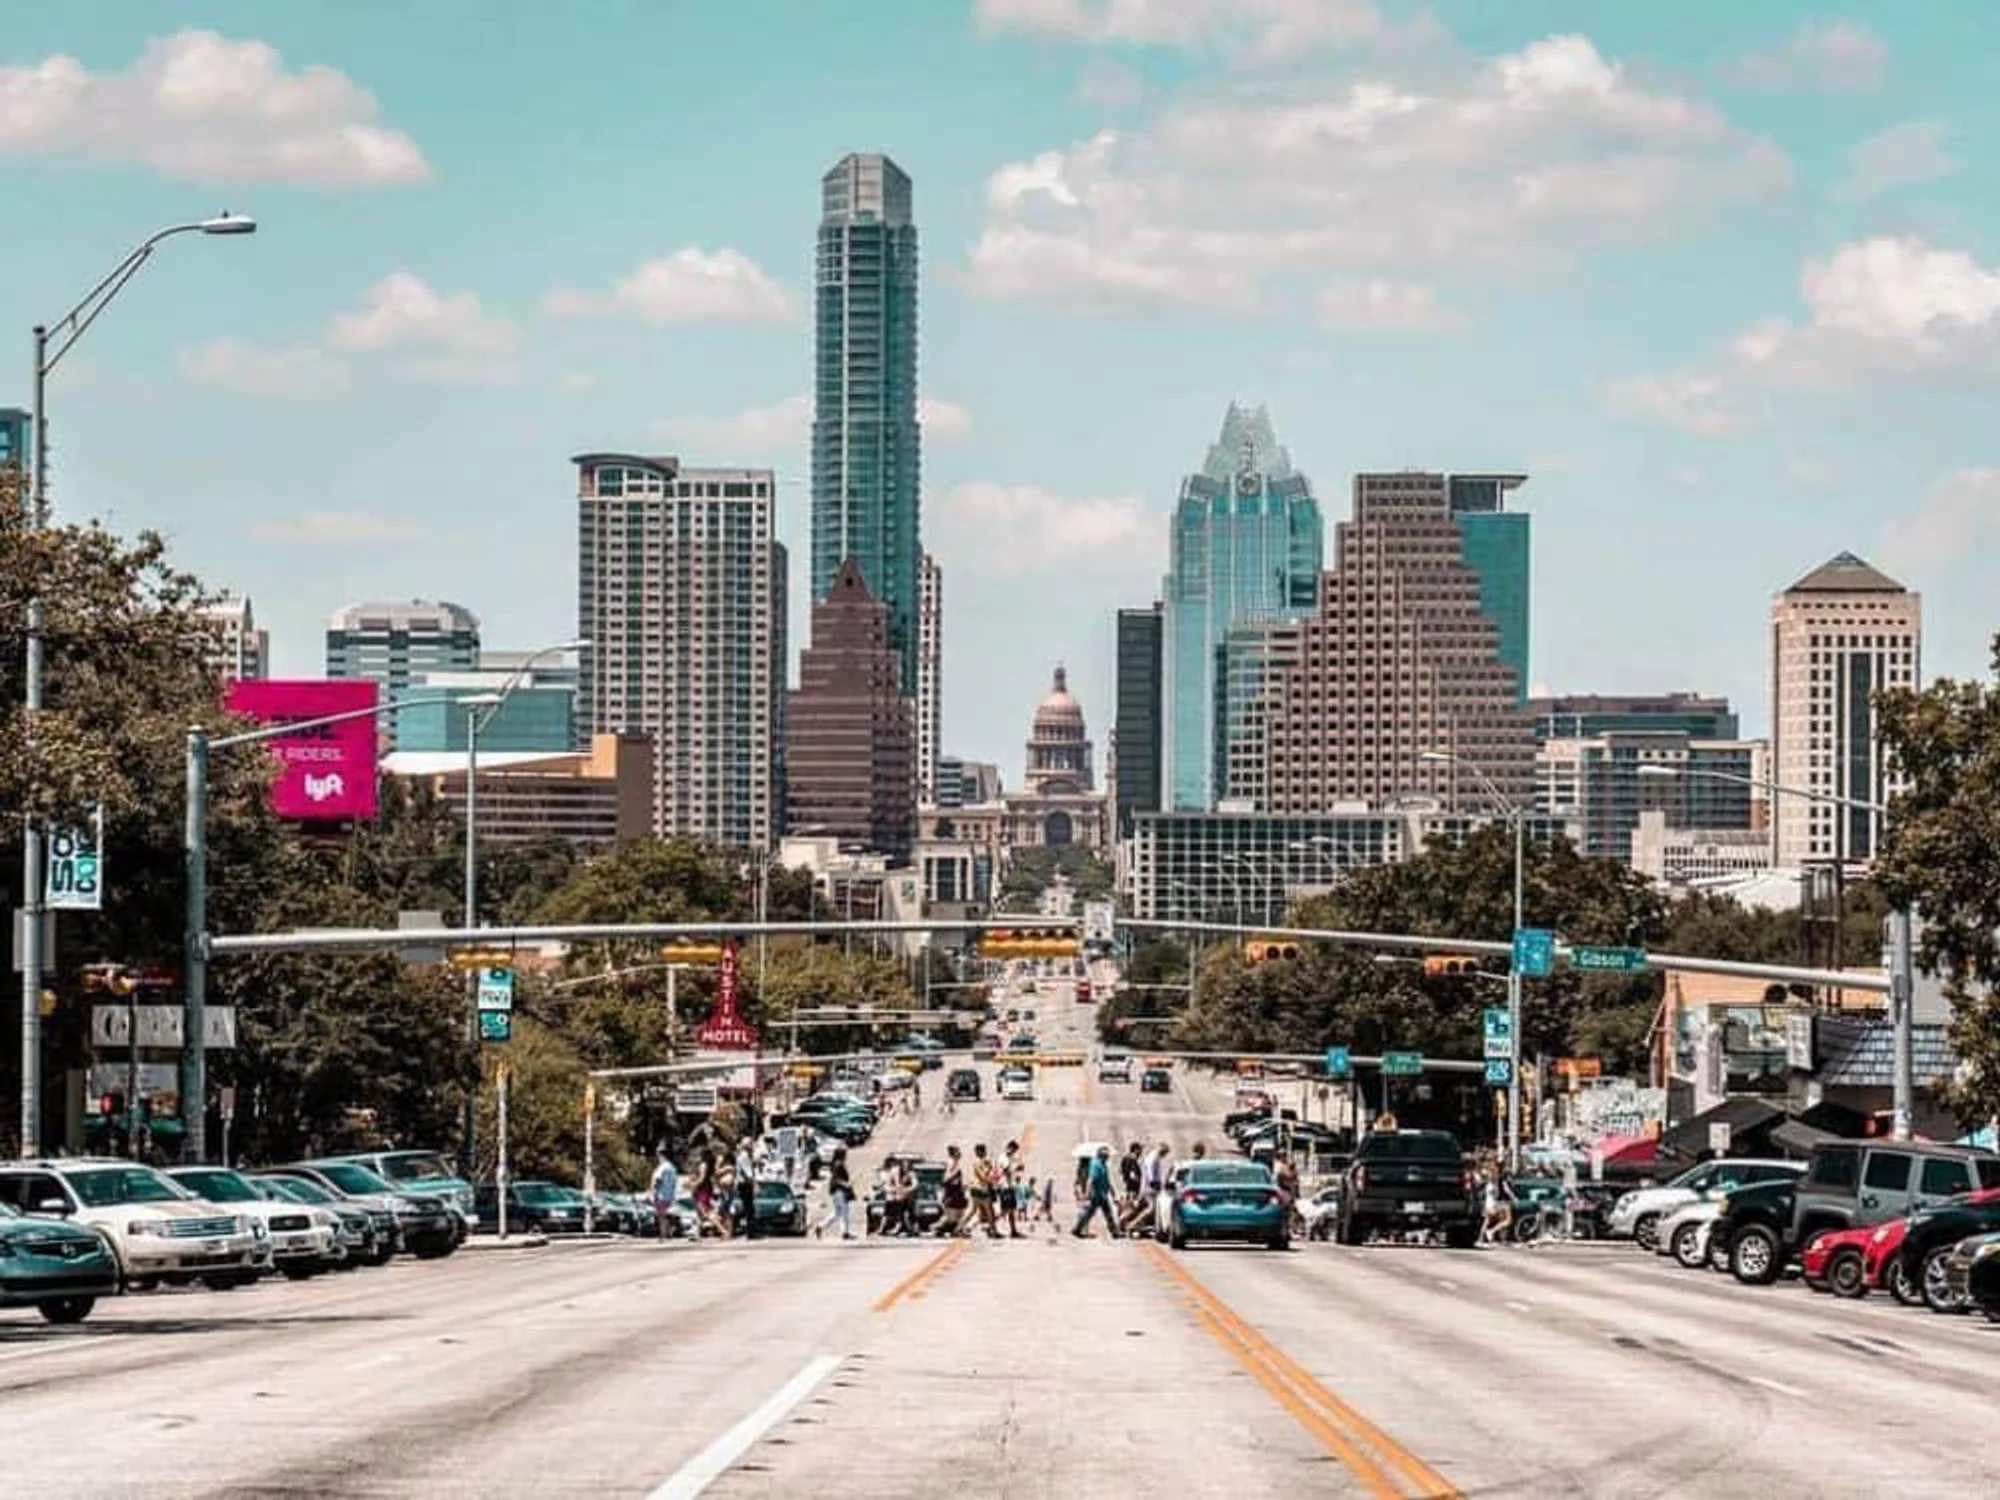 Image of South Congress Avenue with a beautiful skyline view of Downtown